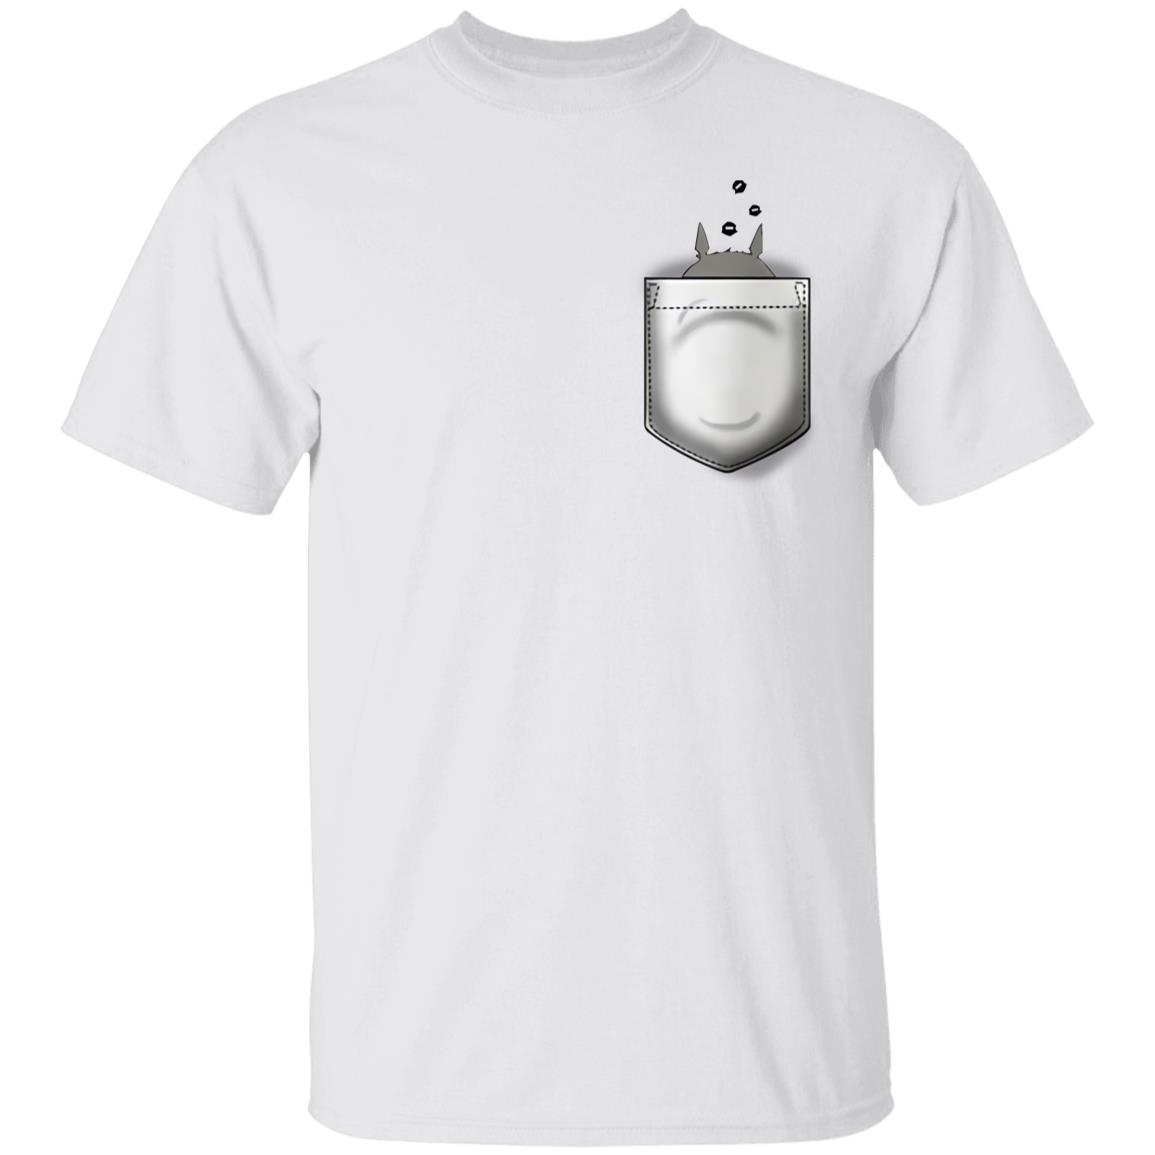 Totoro and Soot Balls in Pocket T Shirt